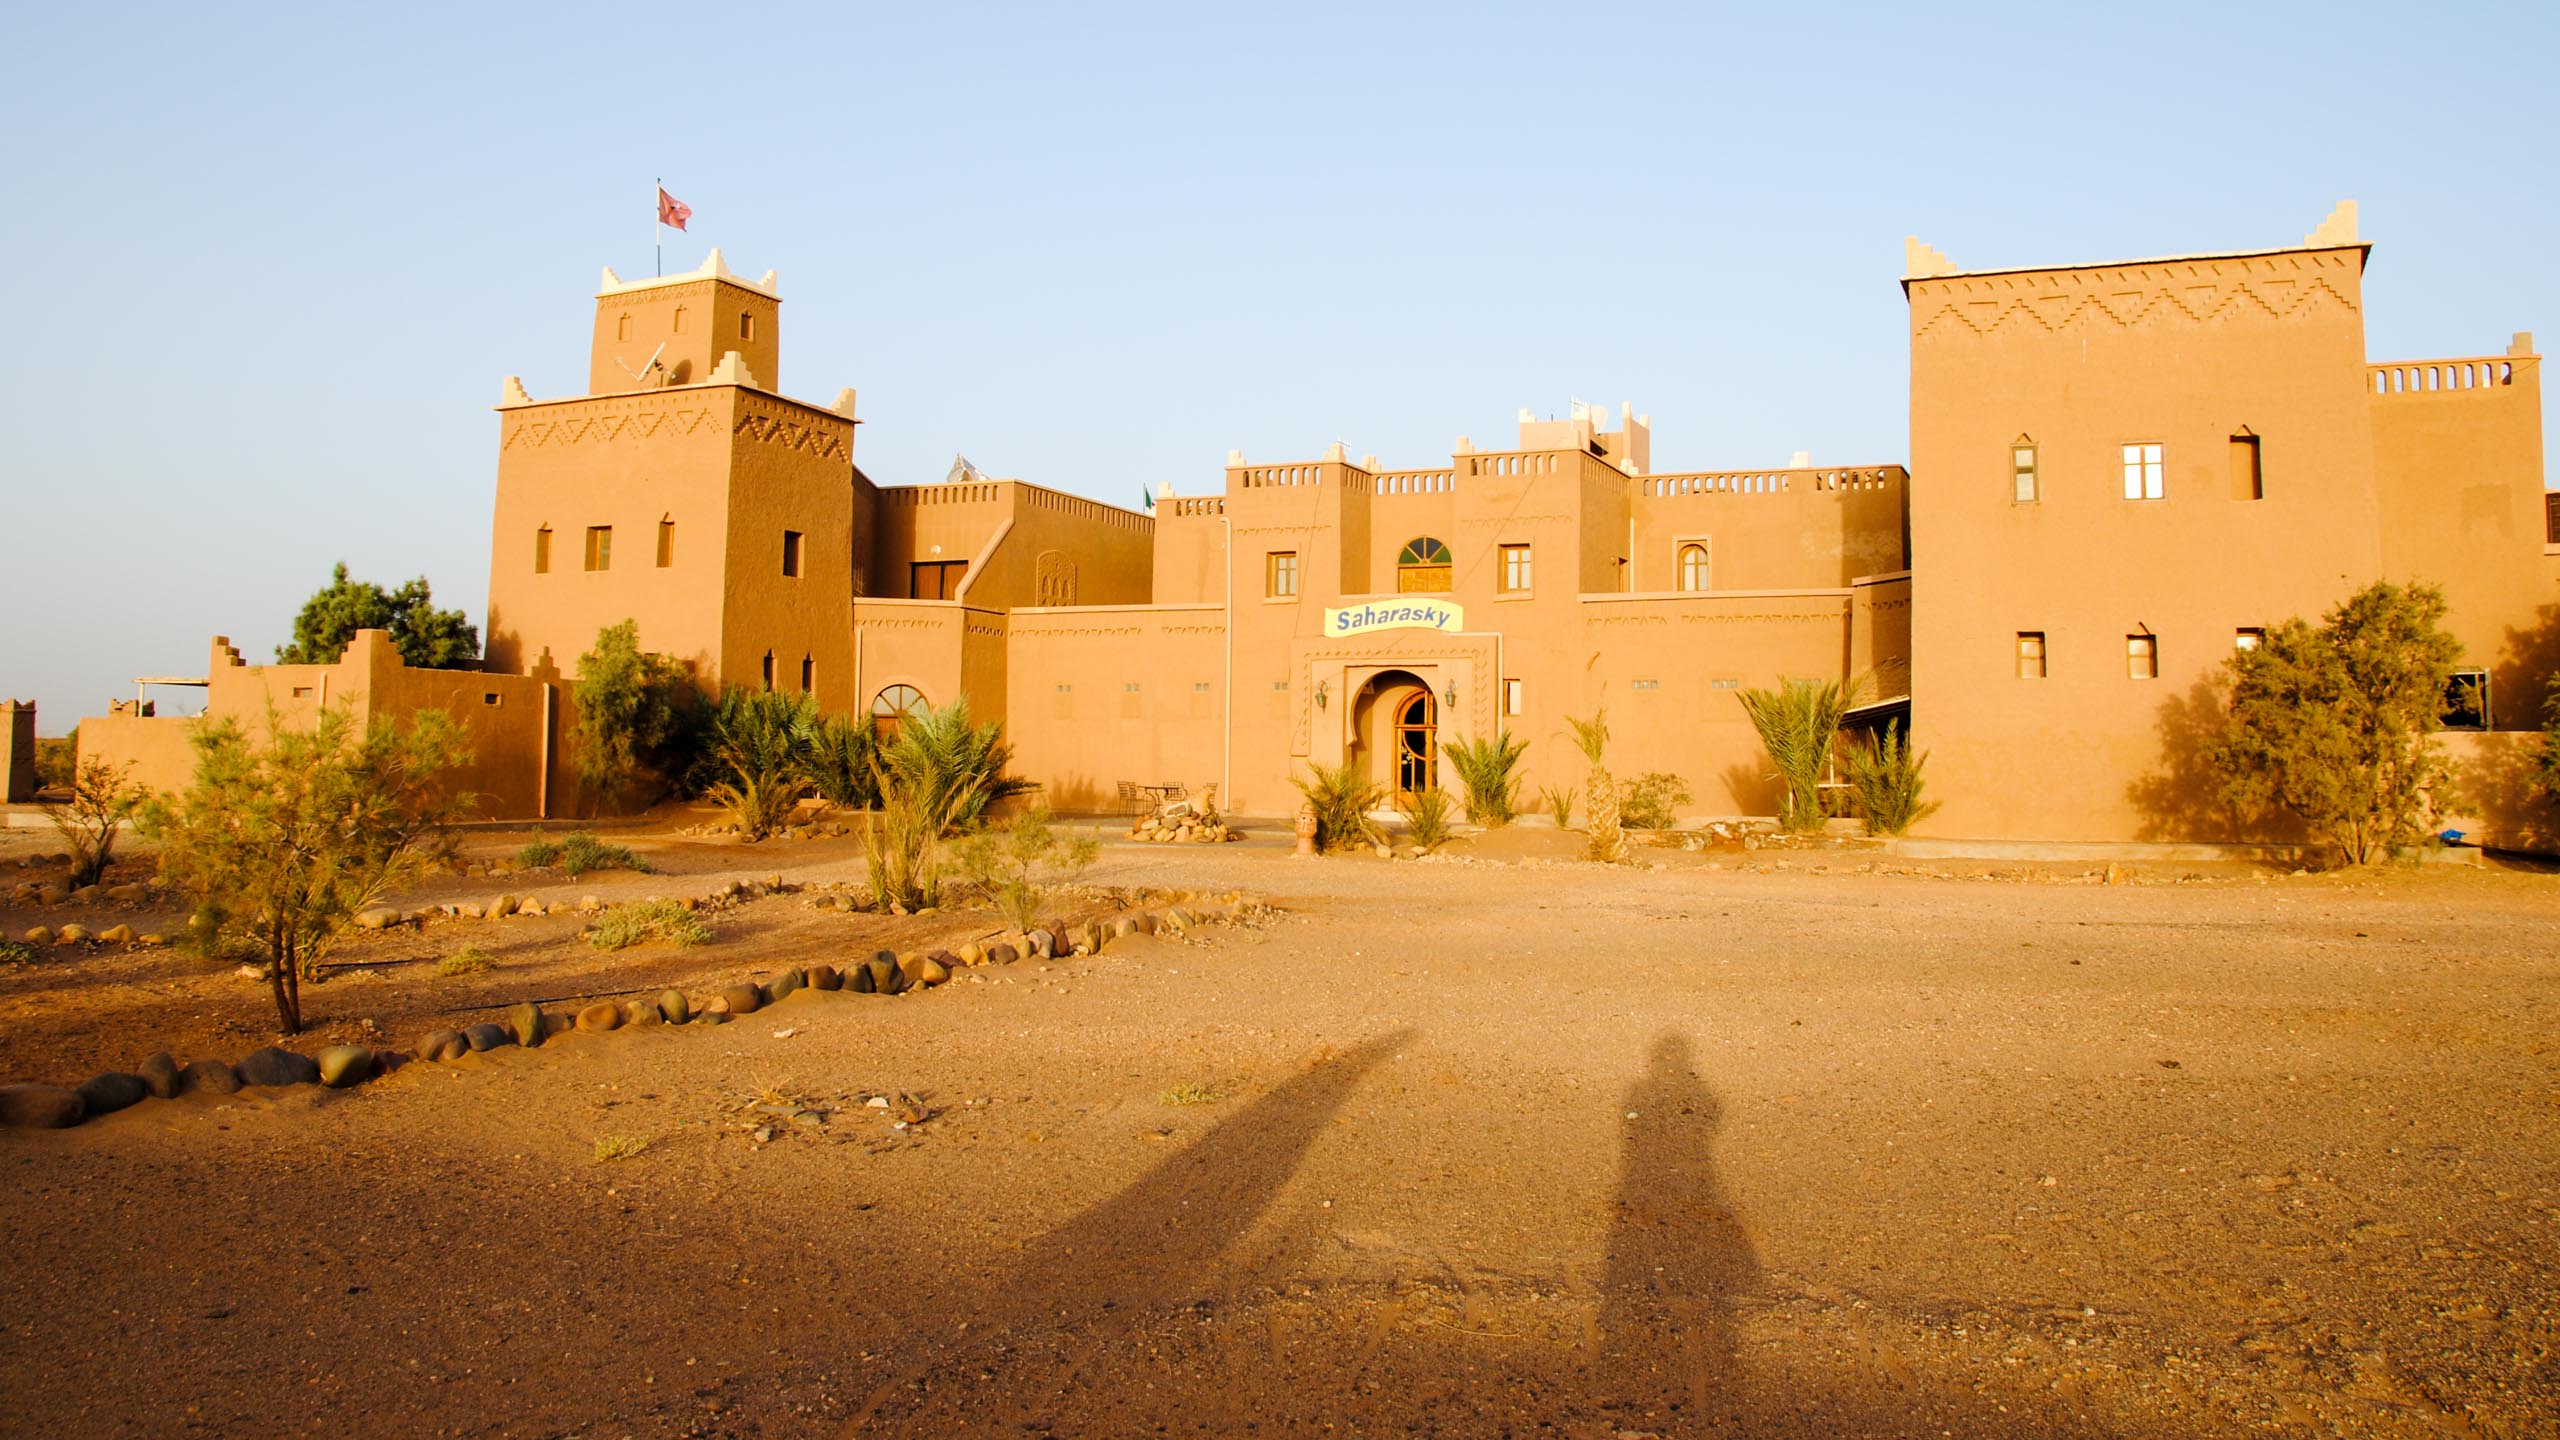 Building in the desert of Morocco